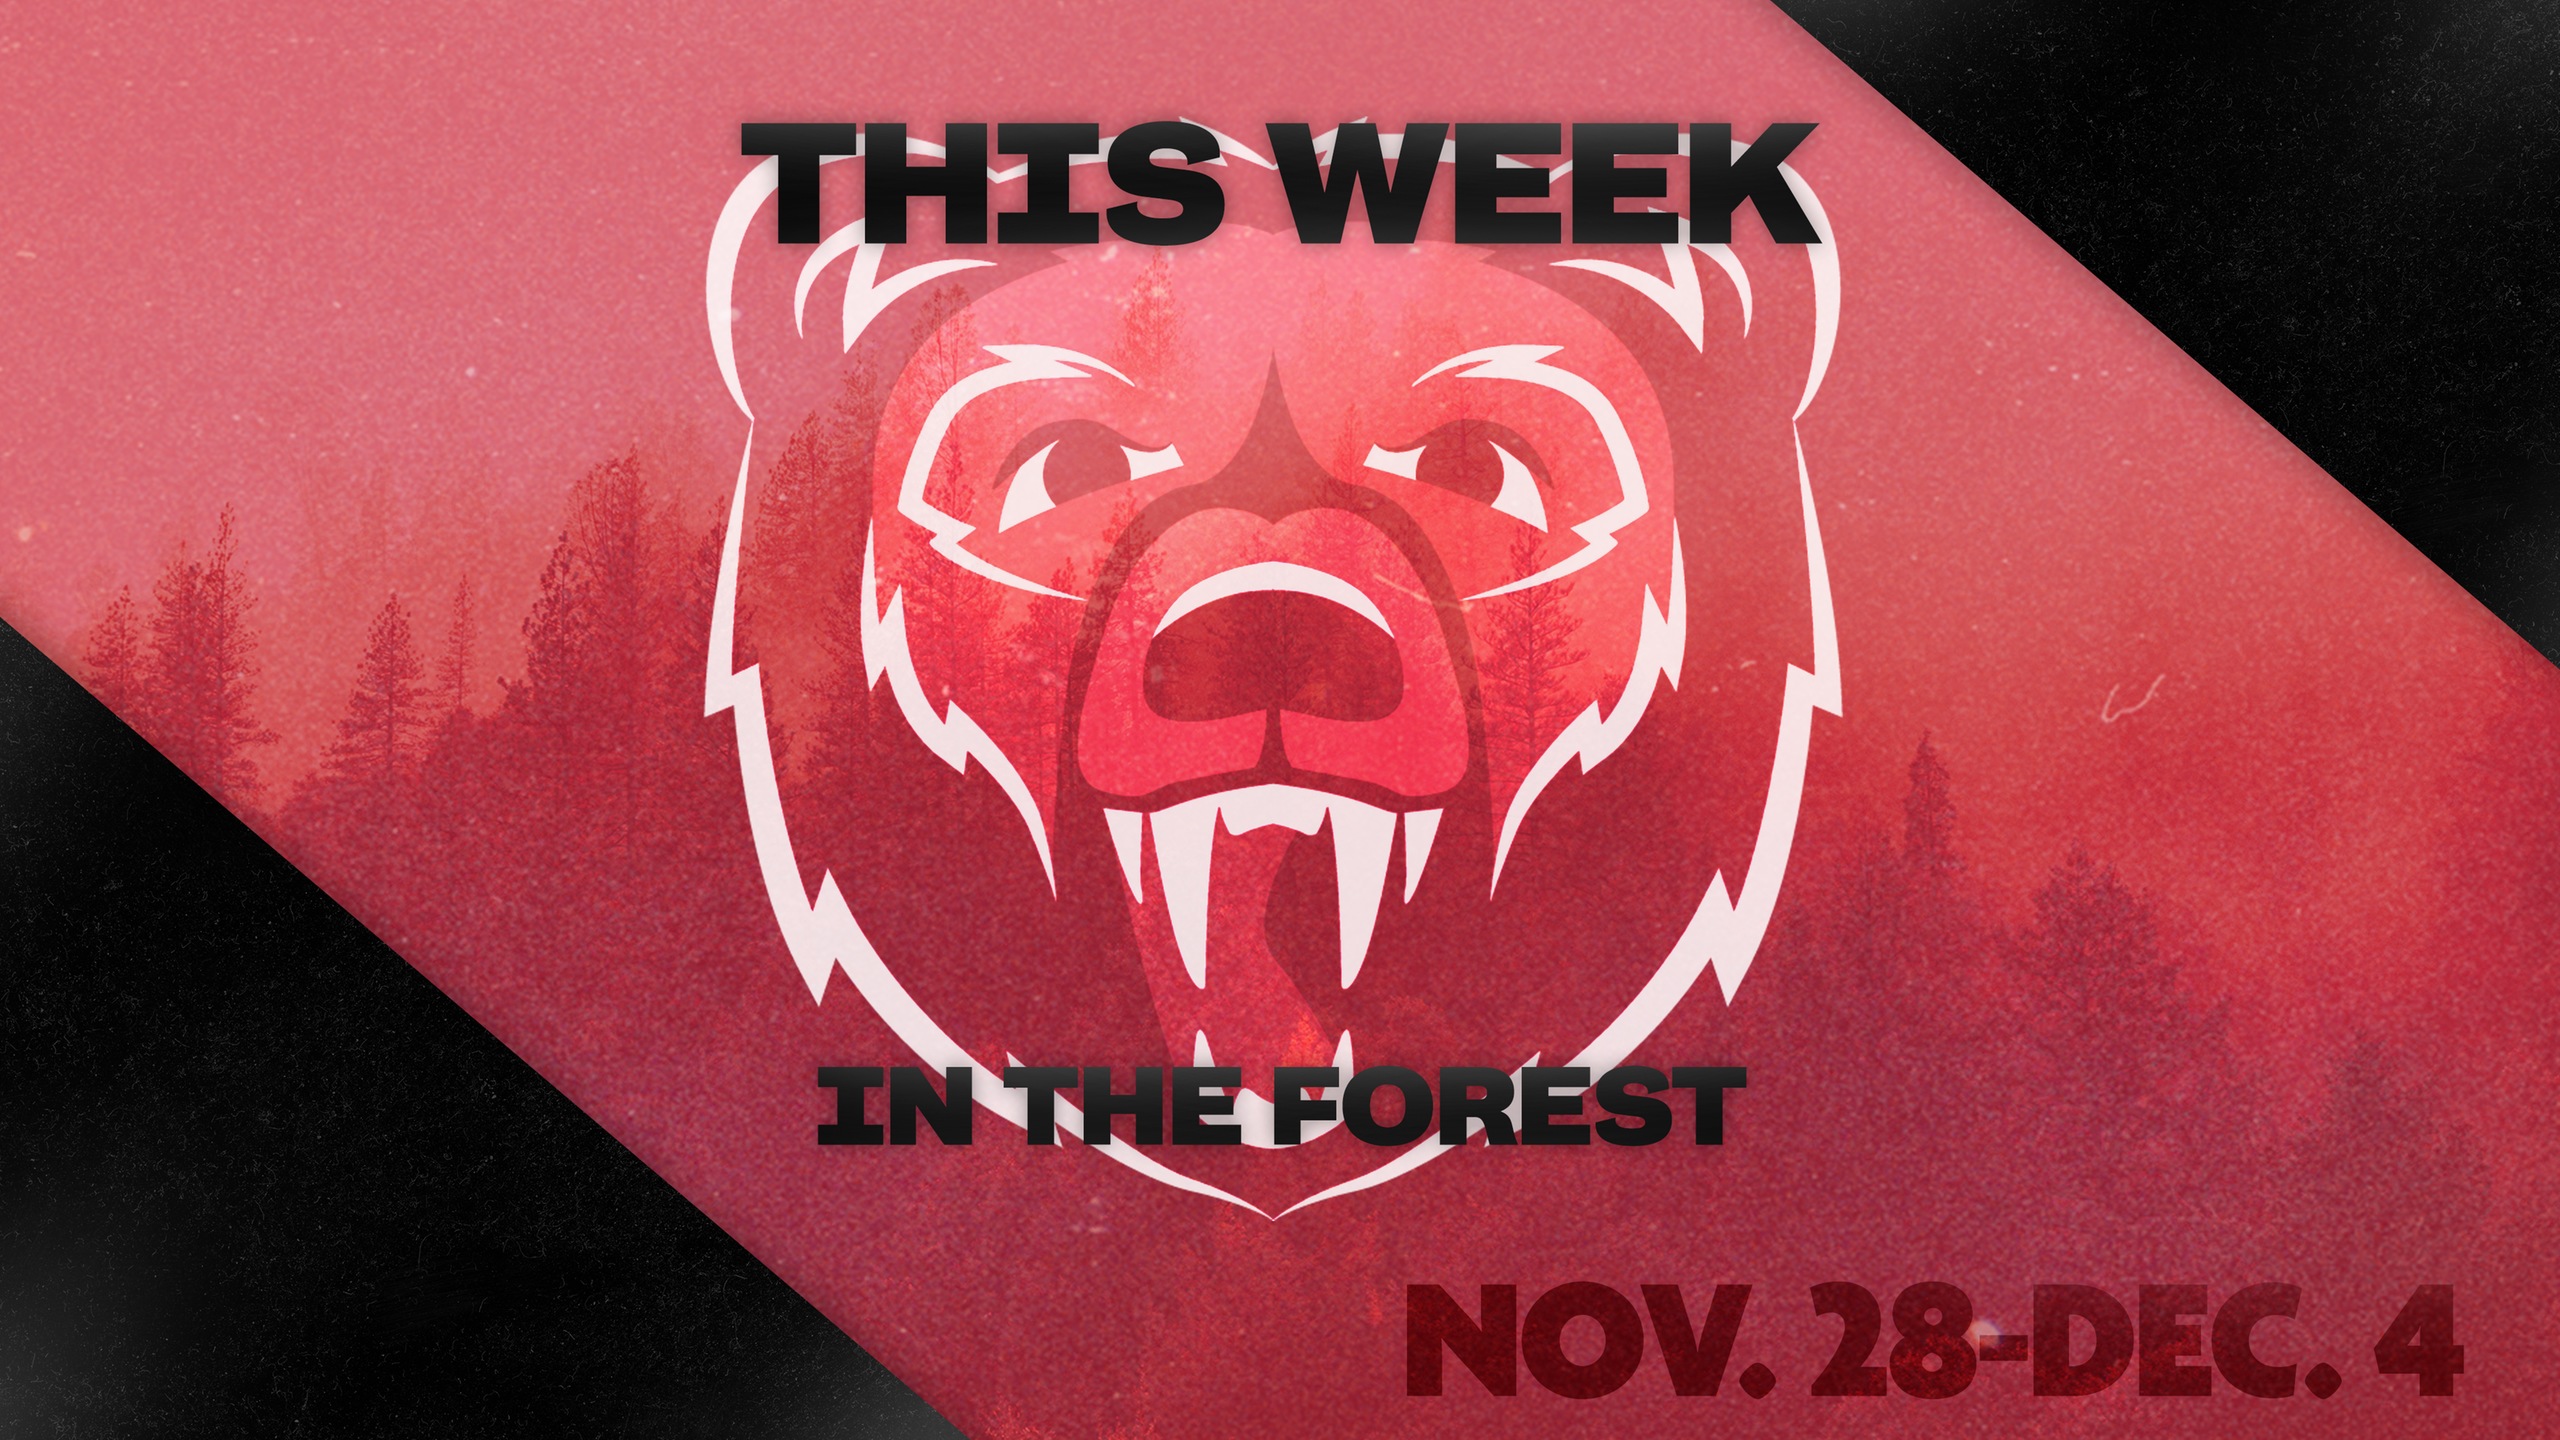 This Week in The Forest: Nov. 28-Dec. 4